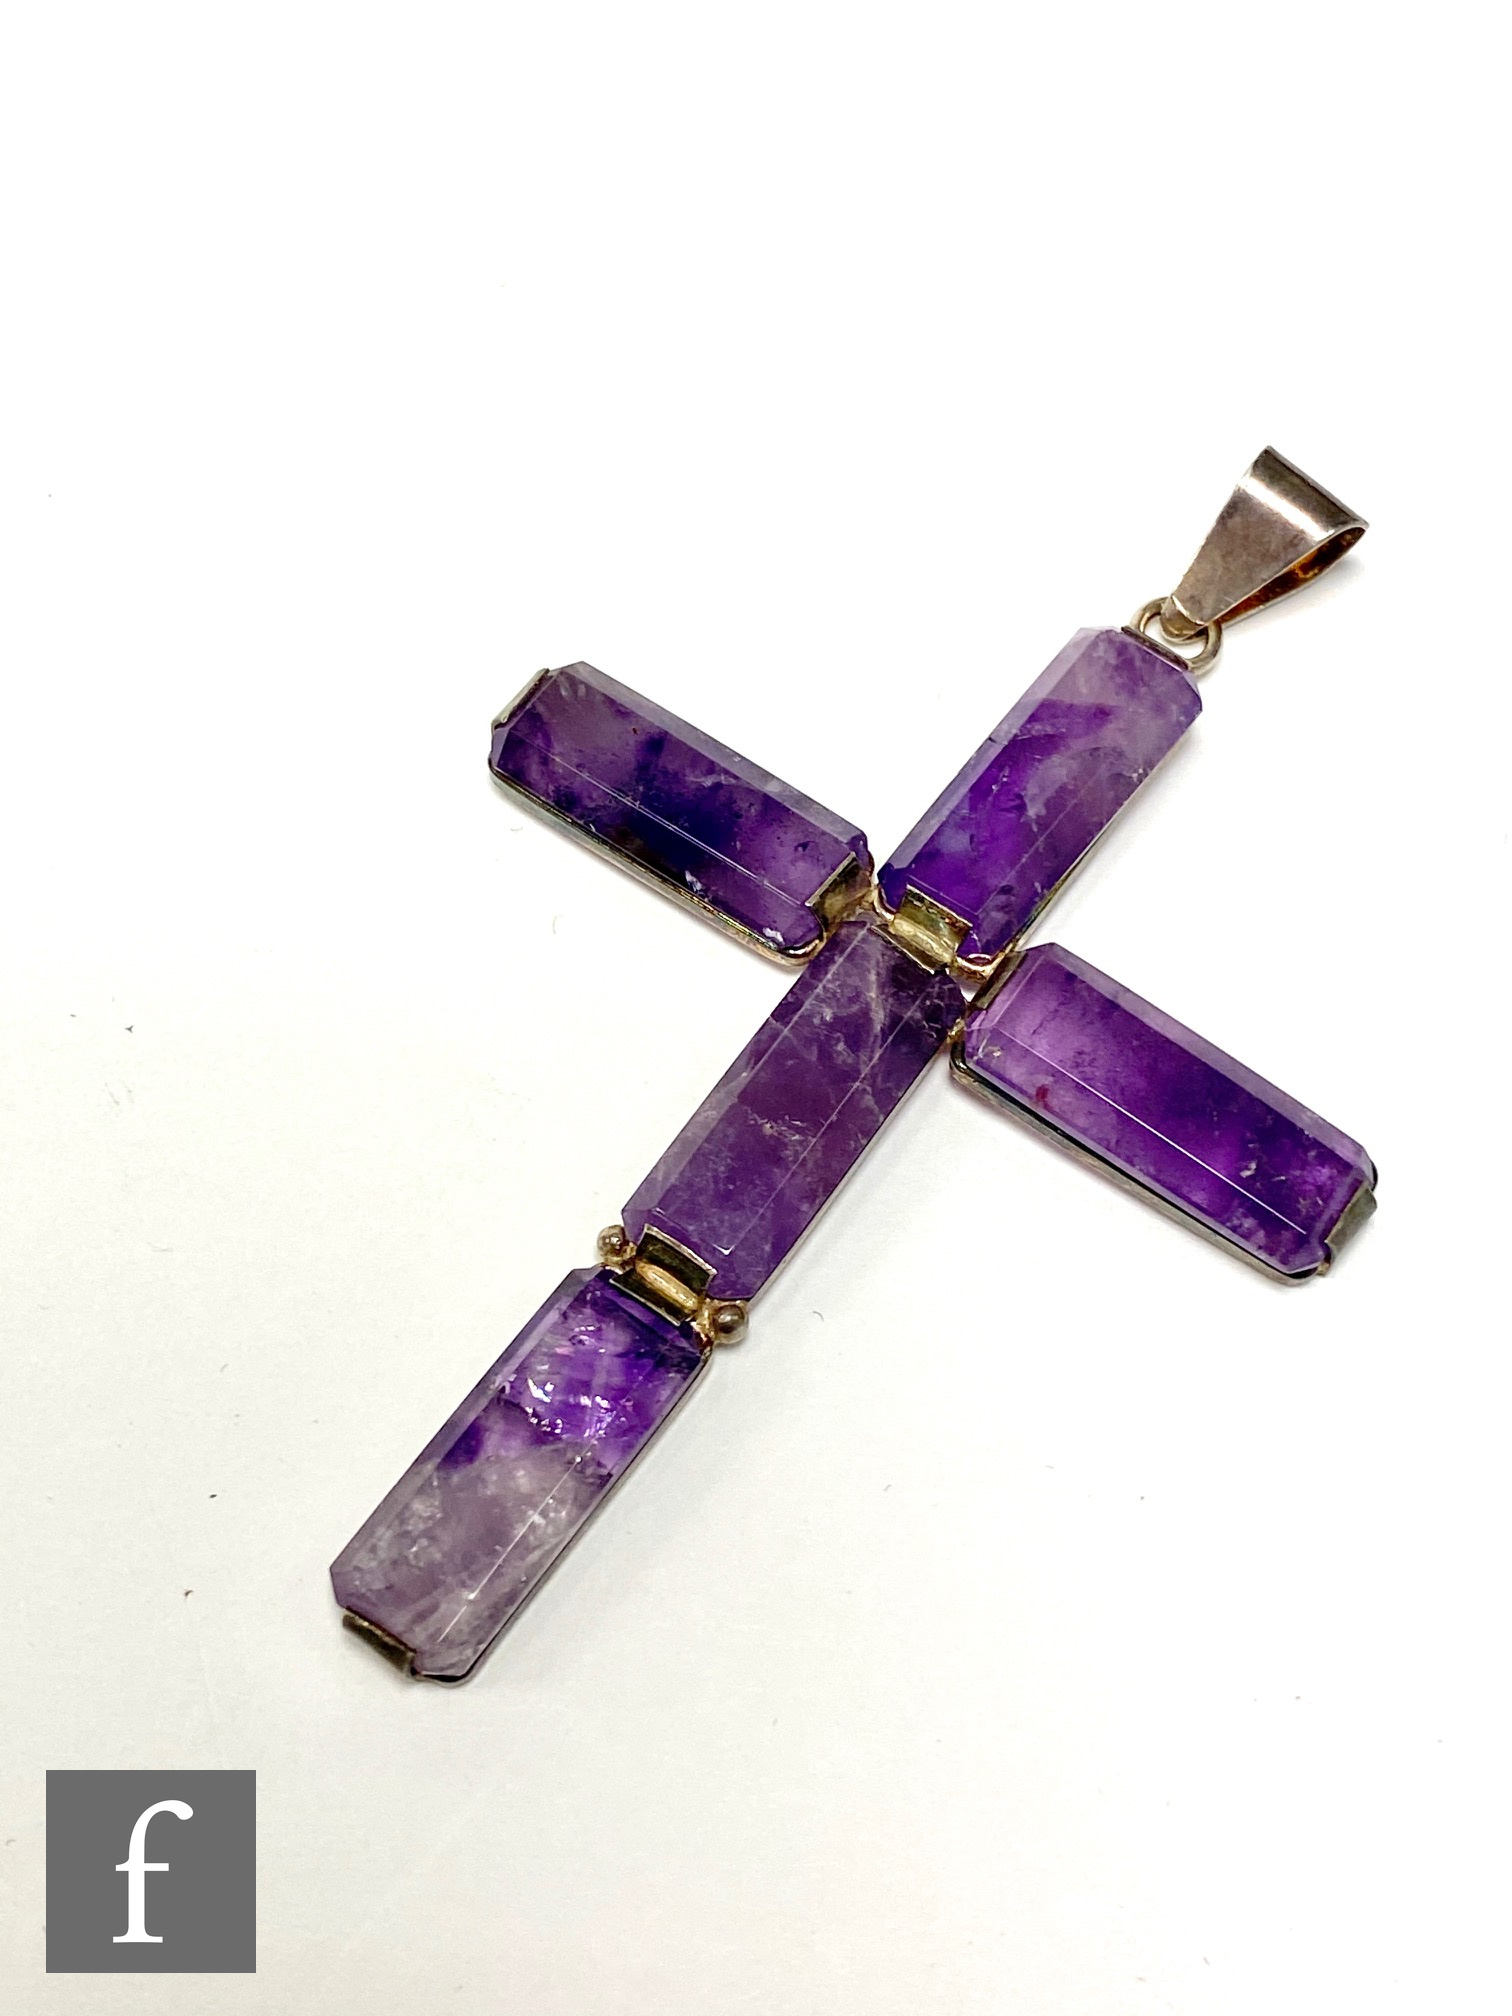 A 1970's decorative pendant in the form of a cross with a silver frame set with rectangular panels